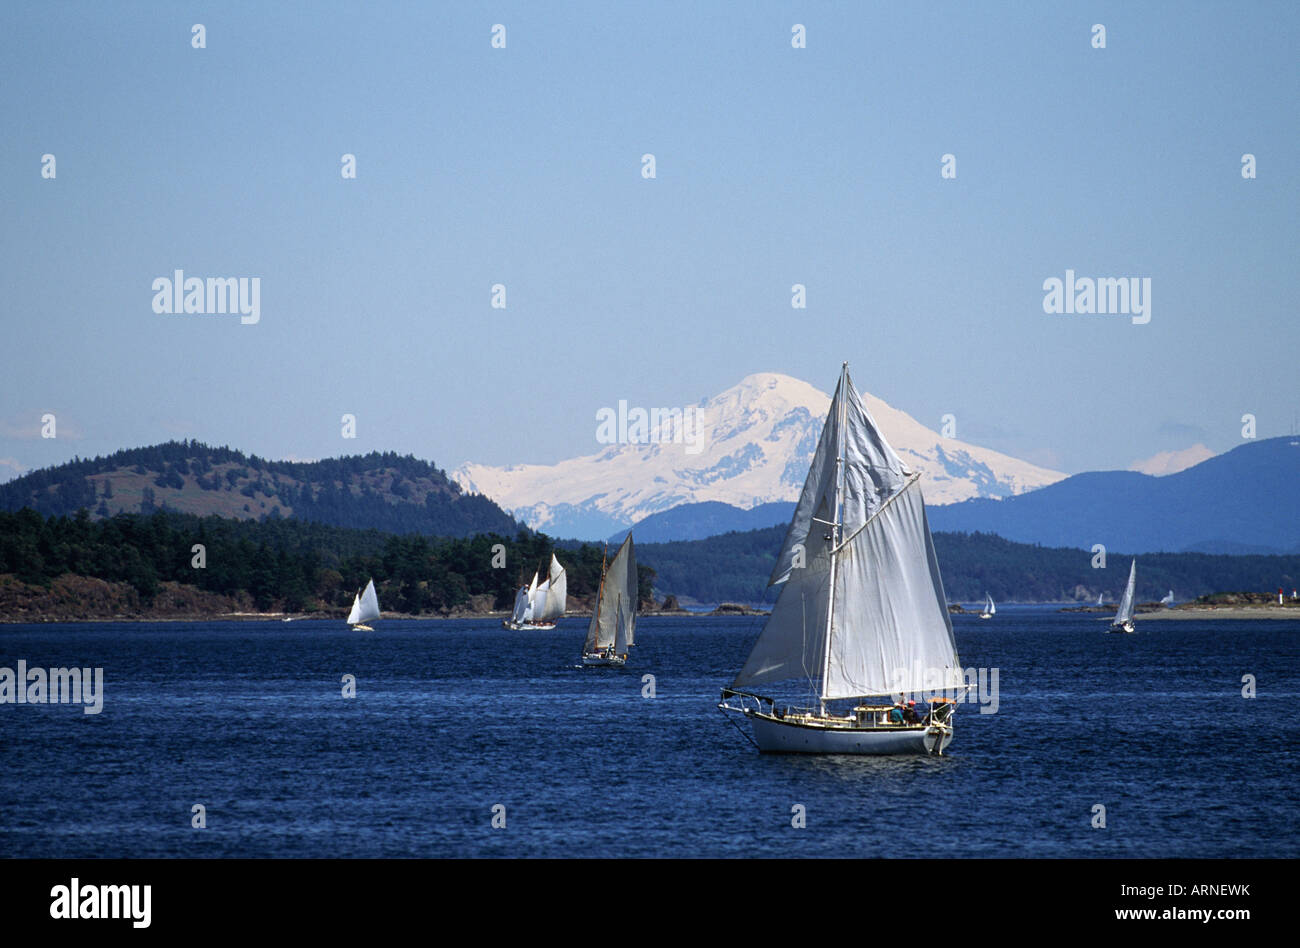 Sidney vista, with gaff rigged sail race and Mt Baker, Vancouver Island, British Columbia, Canada. Stock Photo